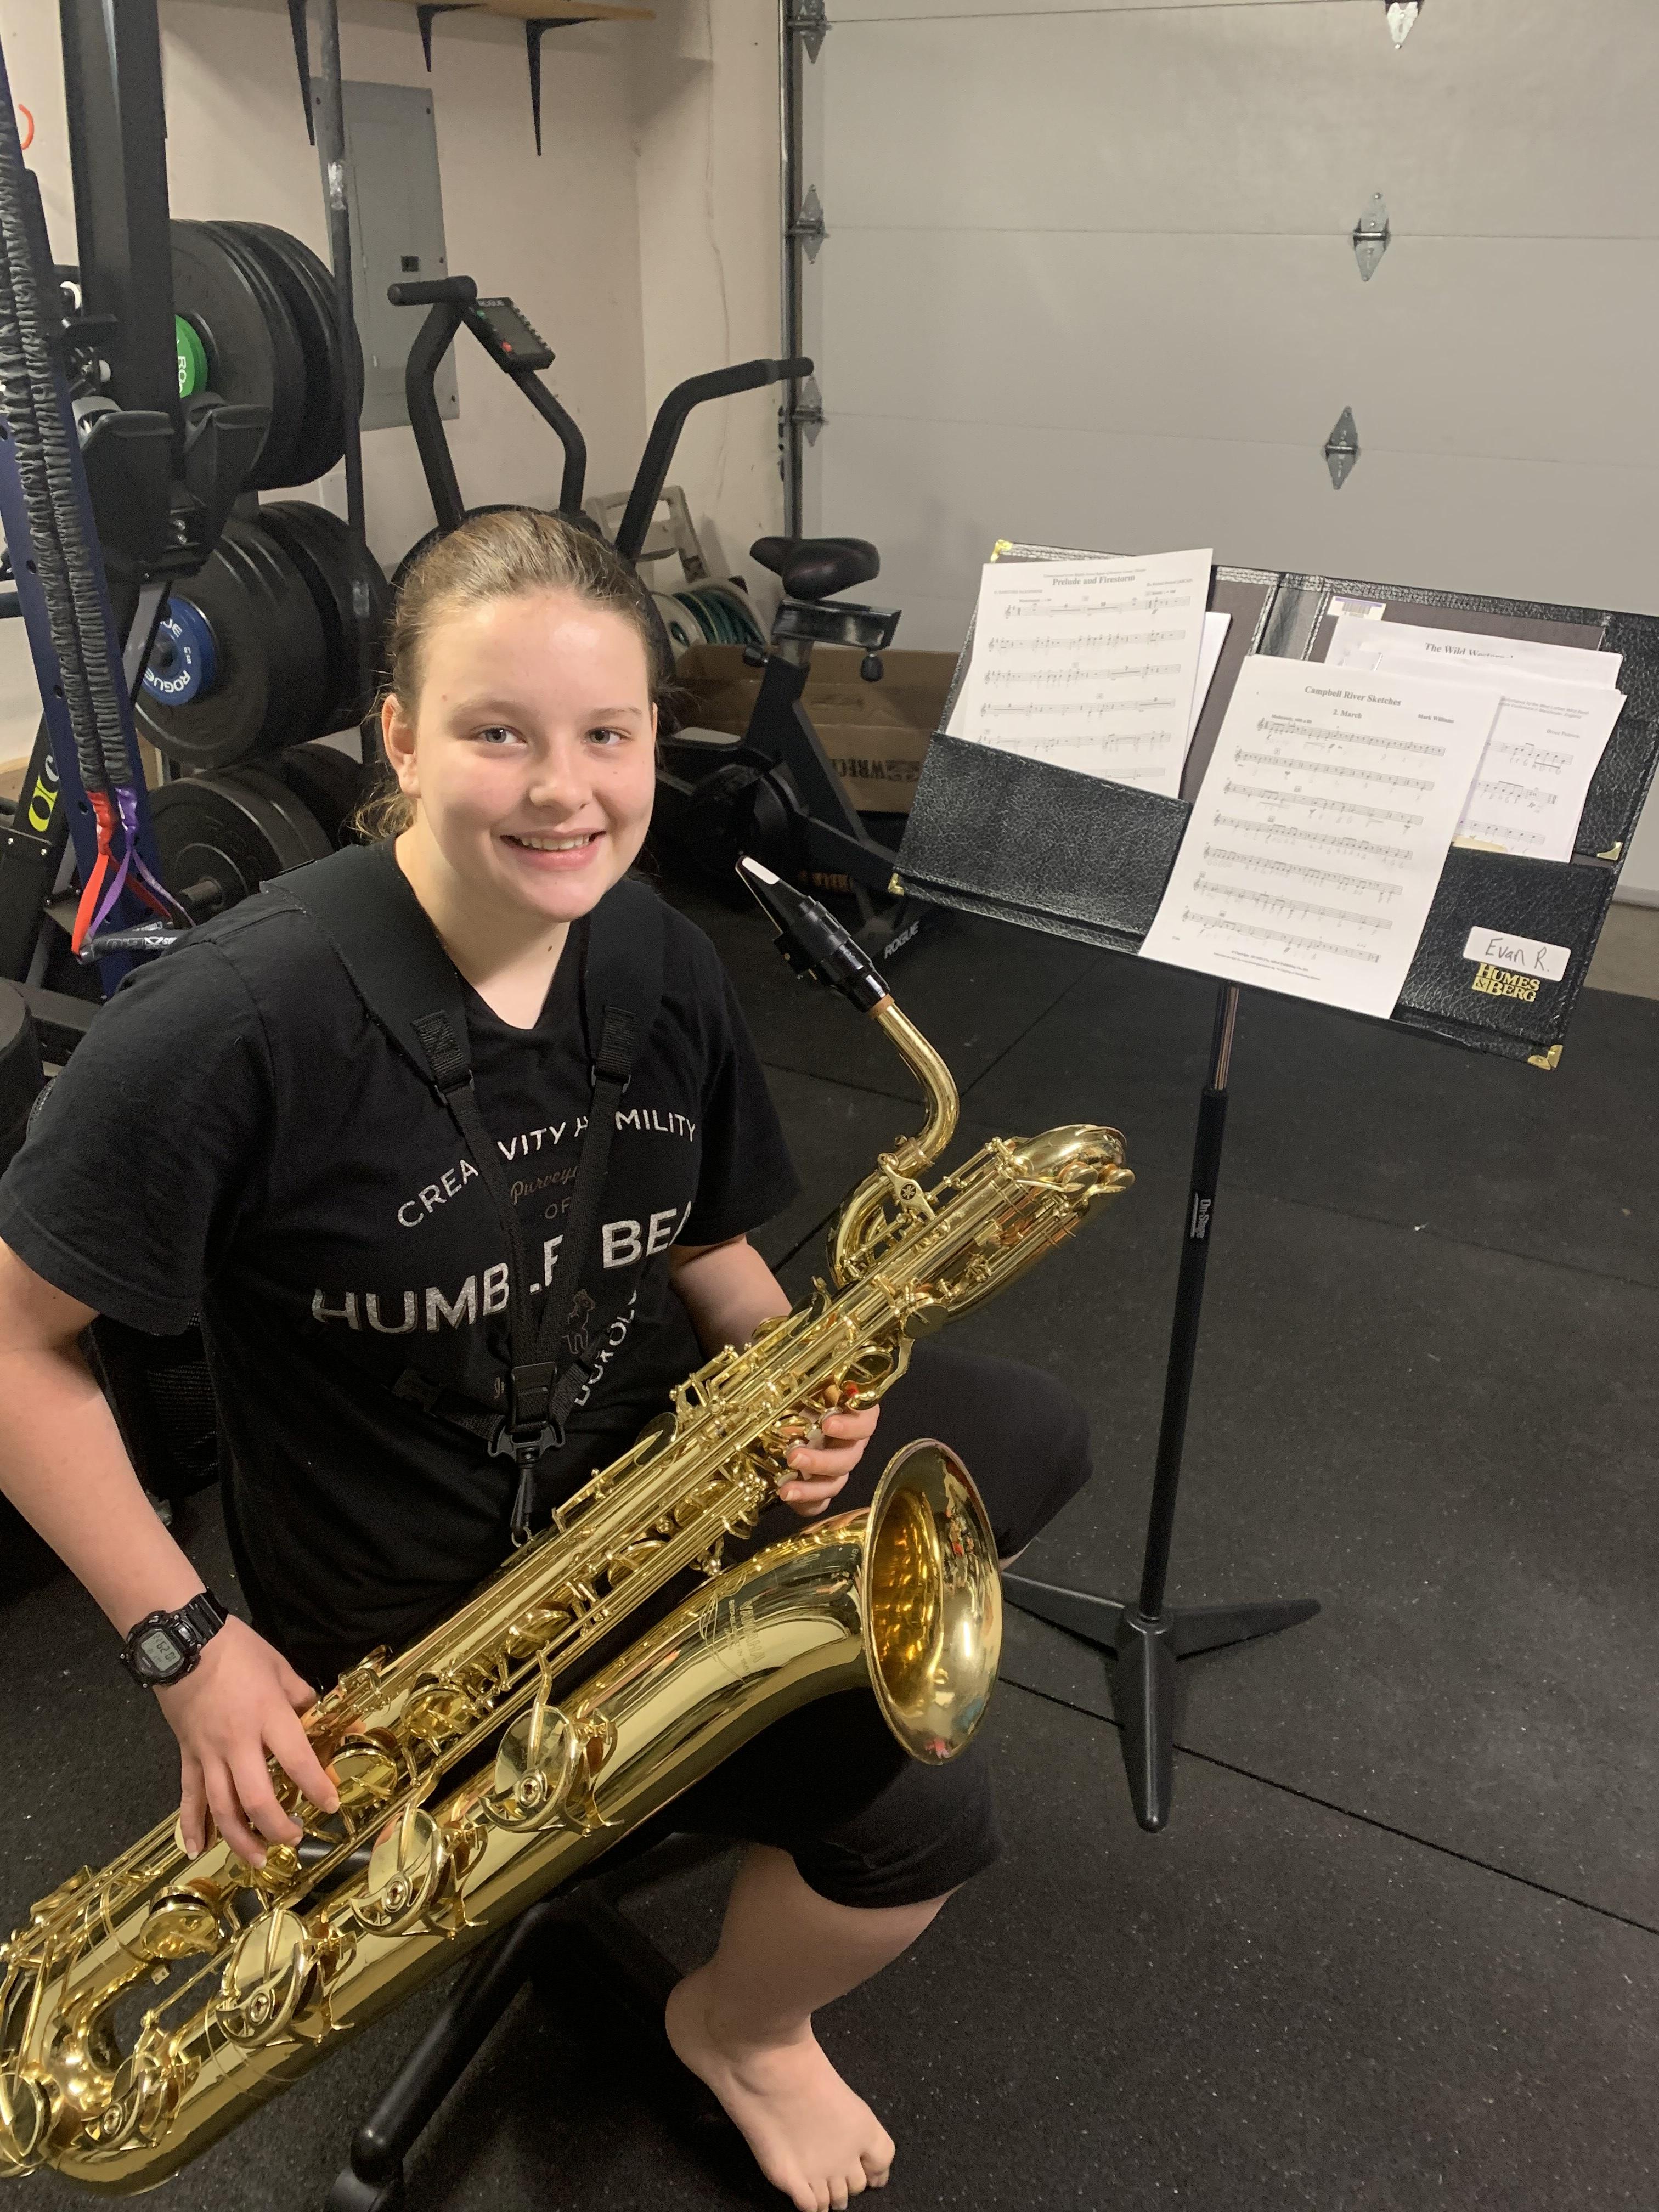 Student with her instrument